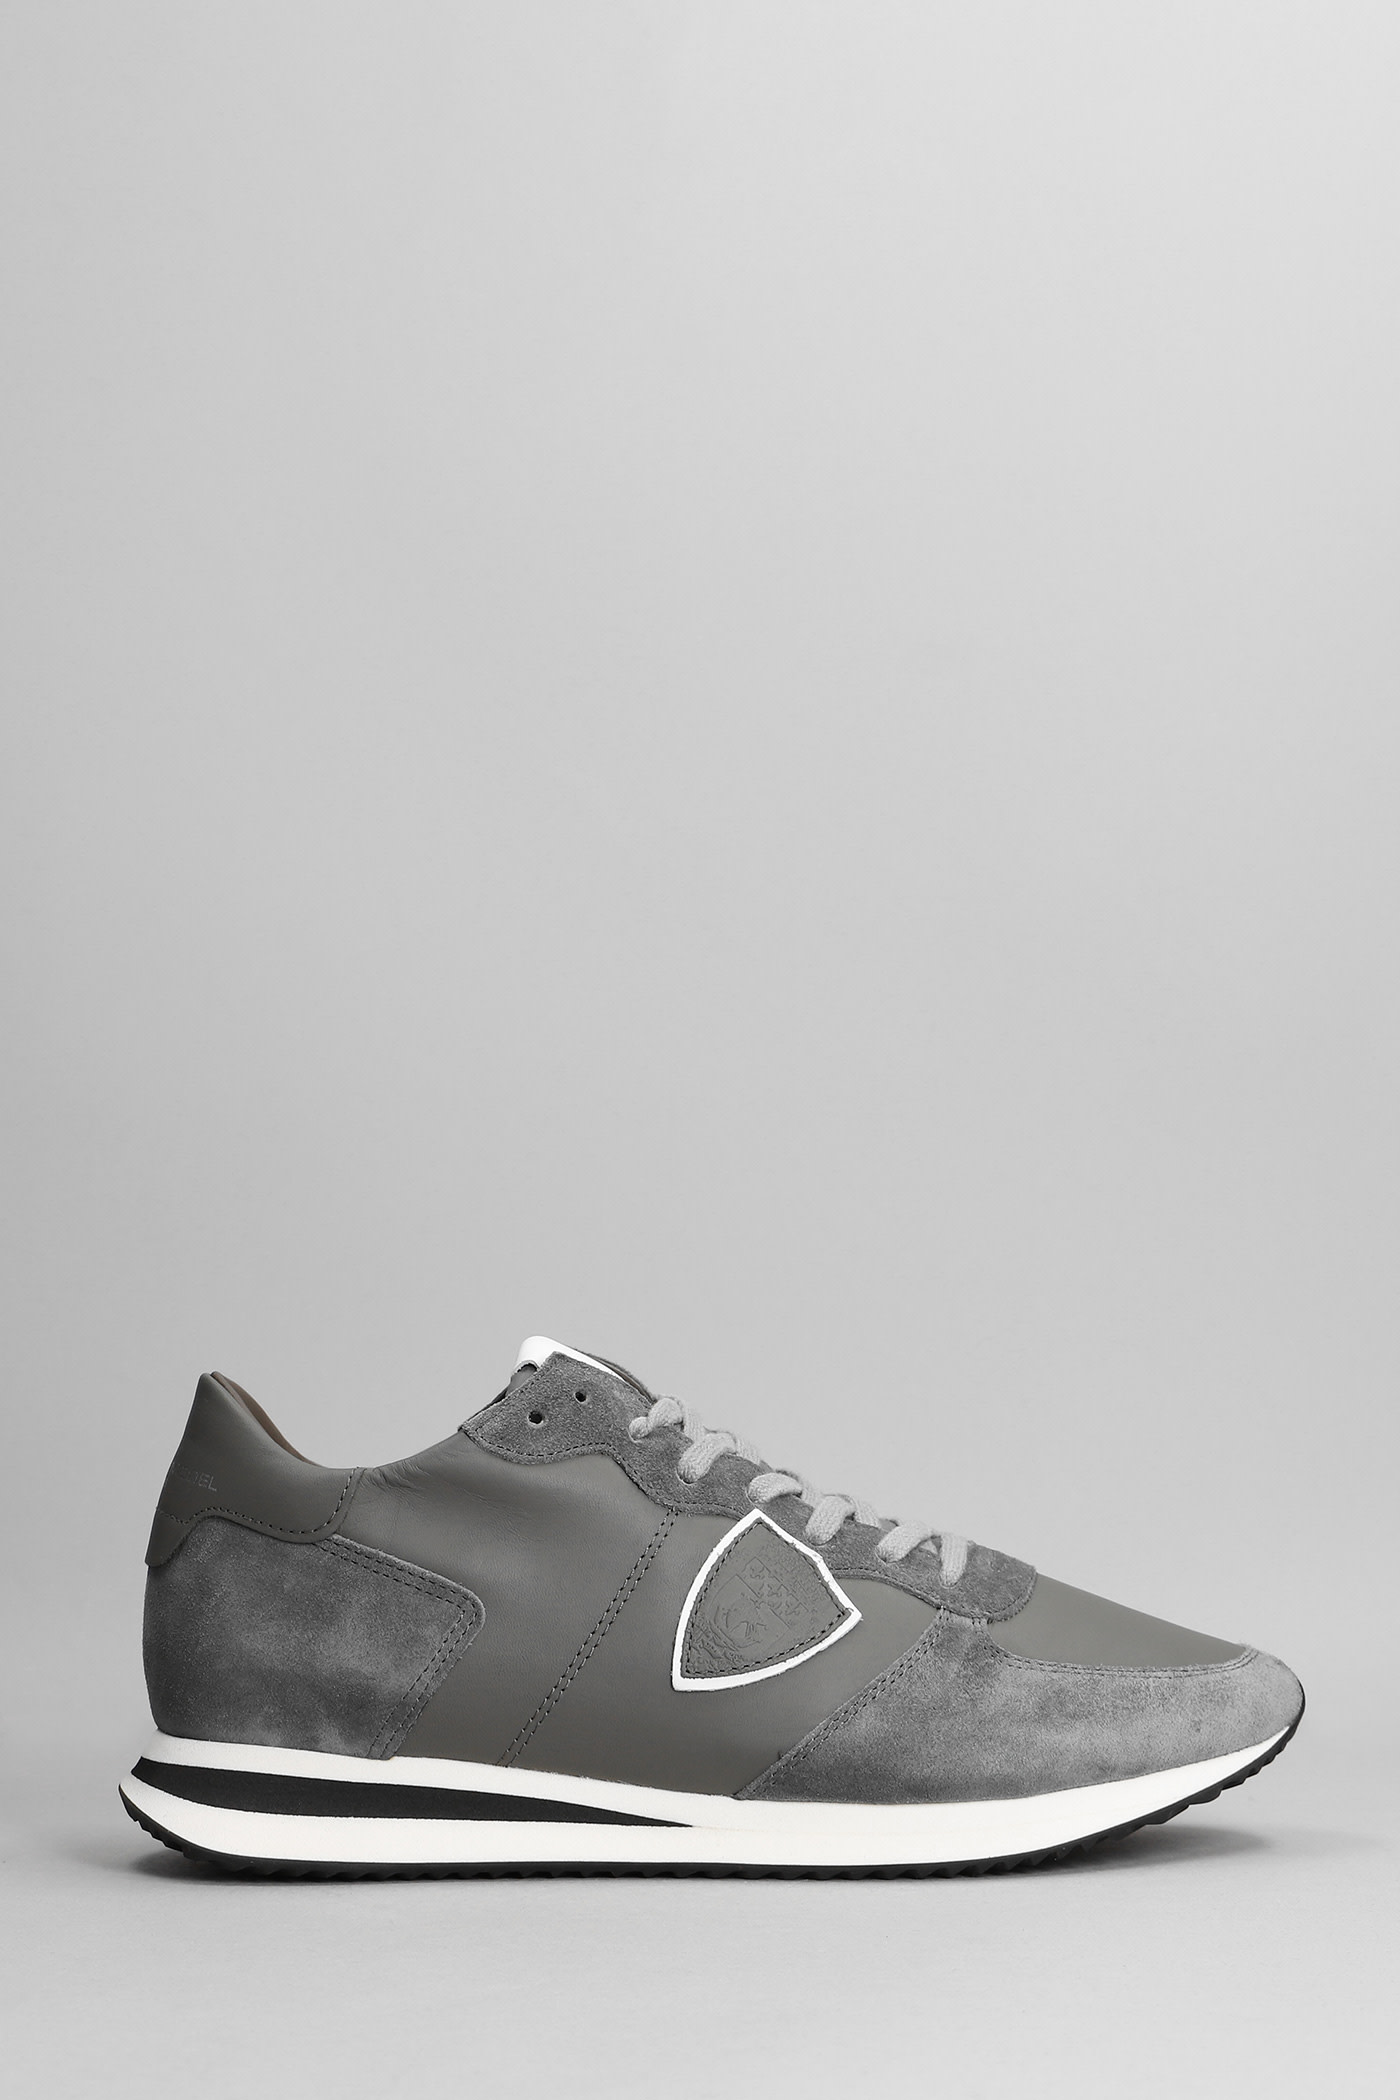 PHILIPPE MODEL TRPX SNEAKERS IN GREY SUEDE AND LEATHER